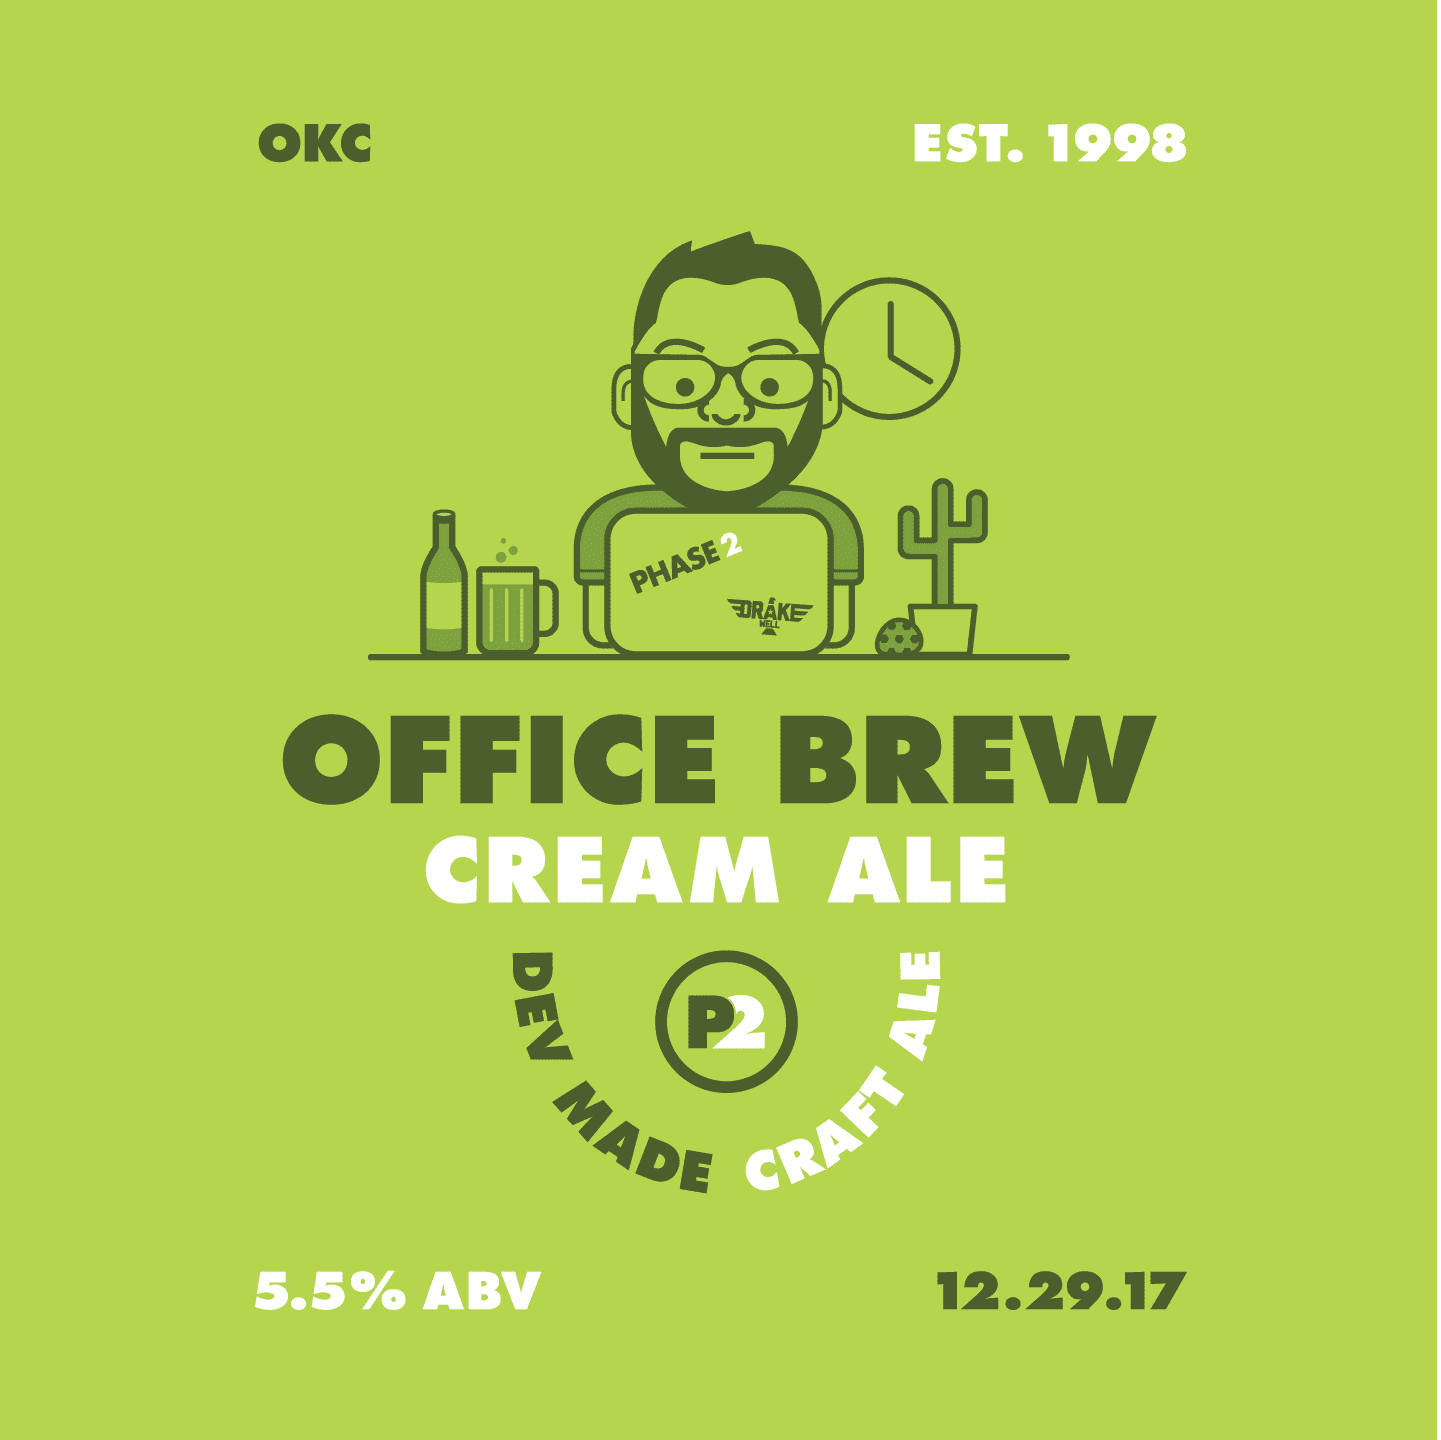 Software Company Office Brew Beer Label Design